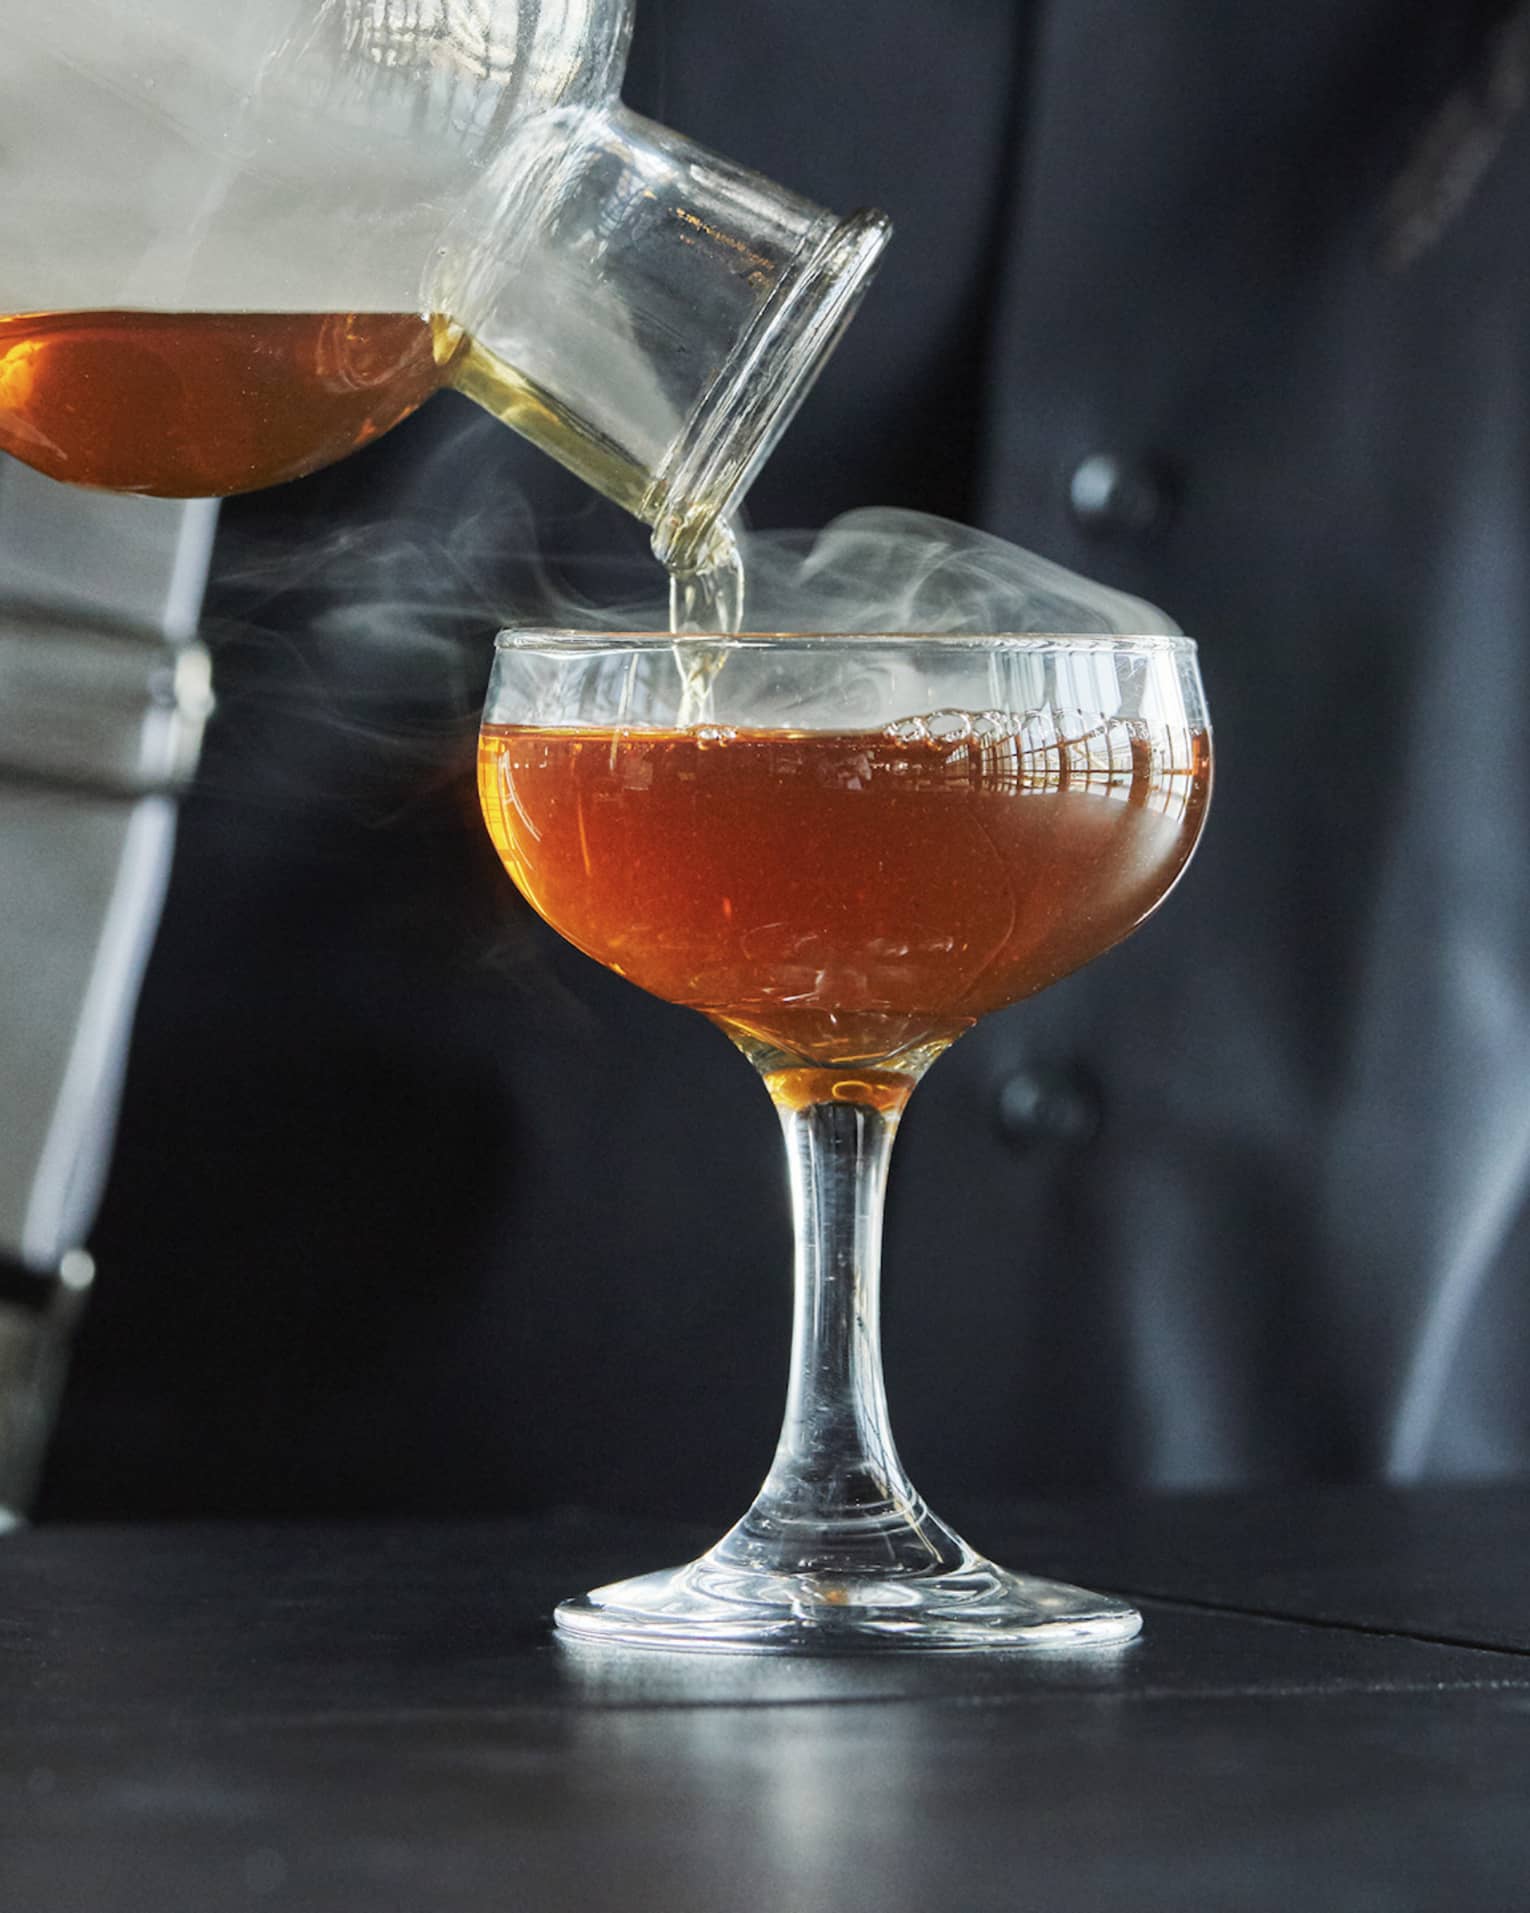 Smoke rolls off the decanter as a Four Seasons staff member pours bourbon into a coupe glass